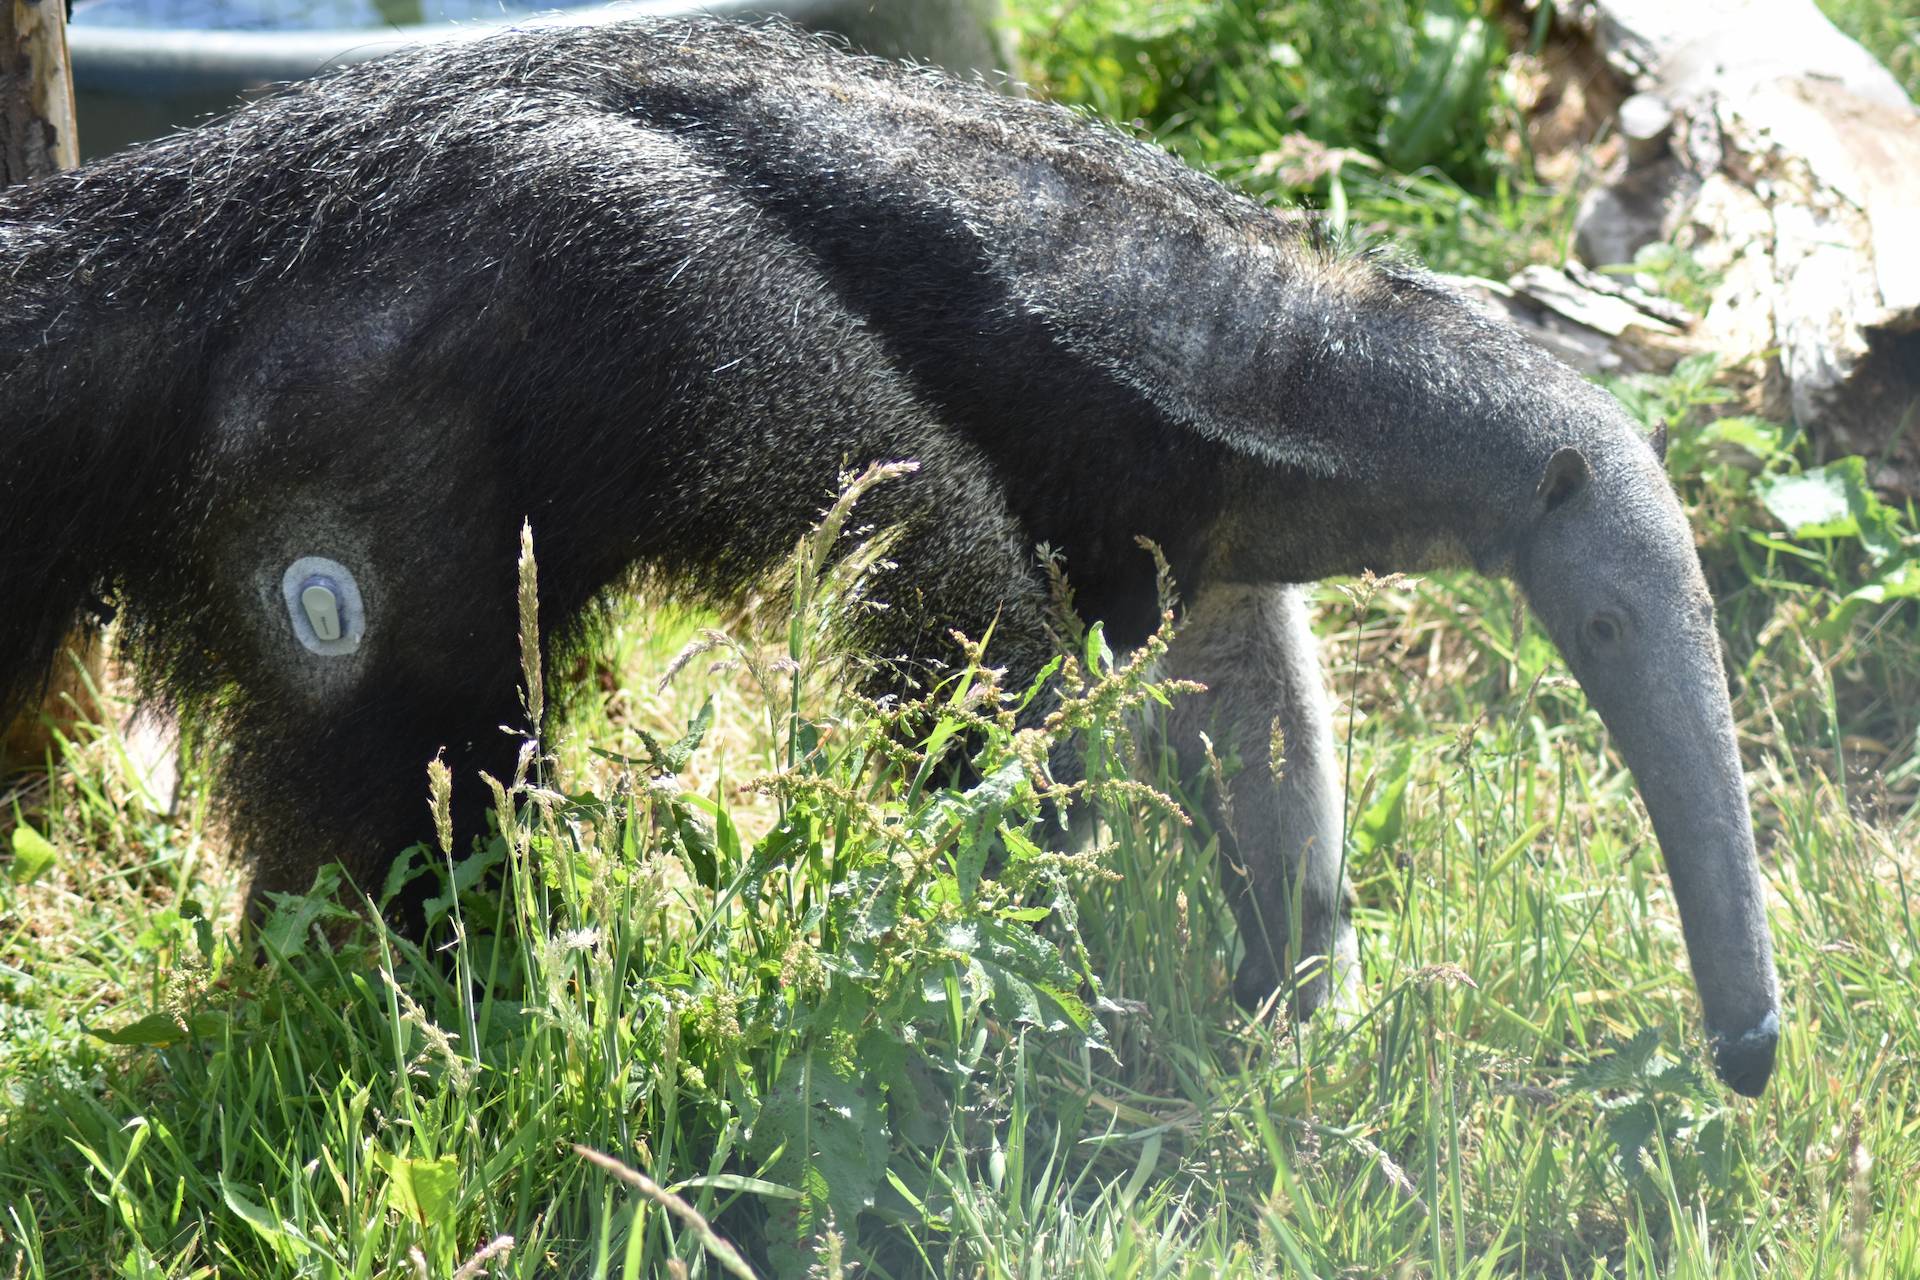 Giant anteater Nala with blood glucose monitor visible

Image: 2022